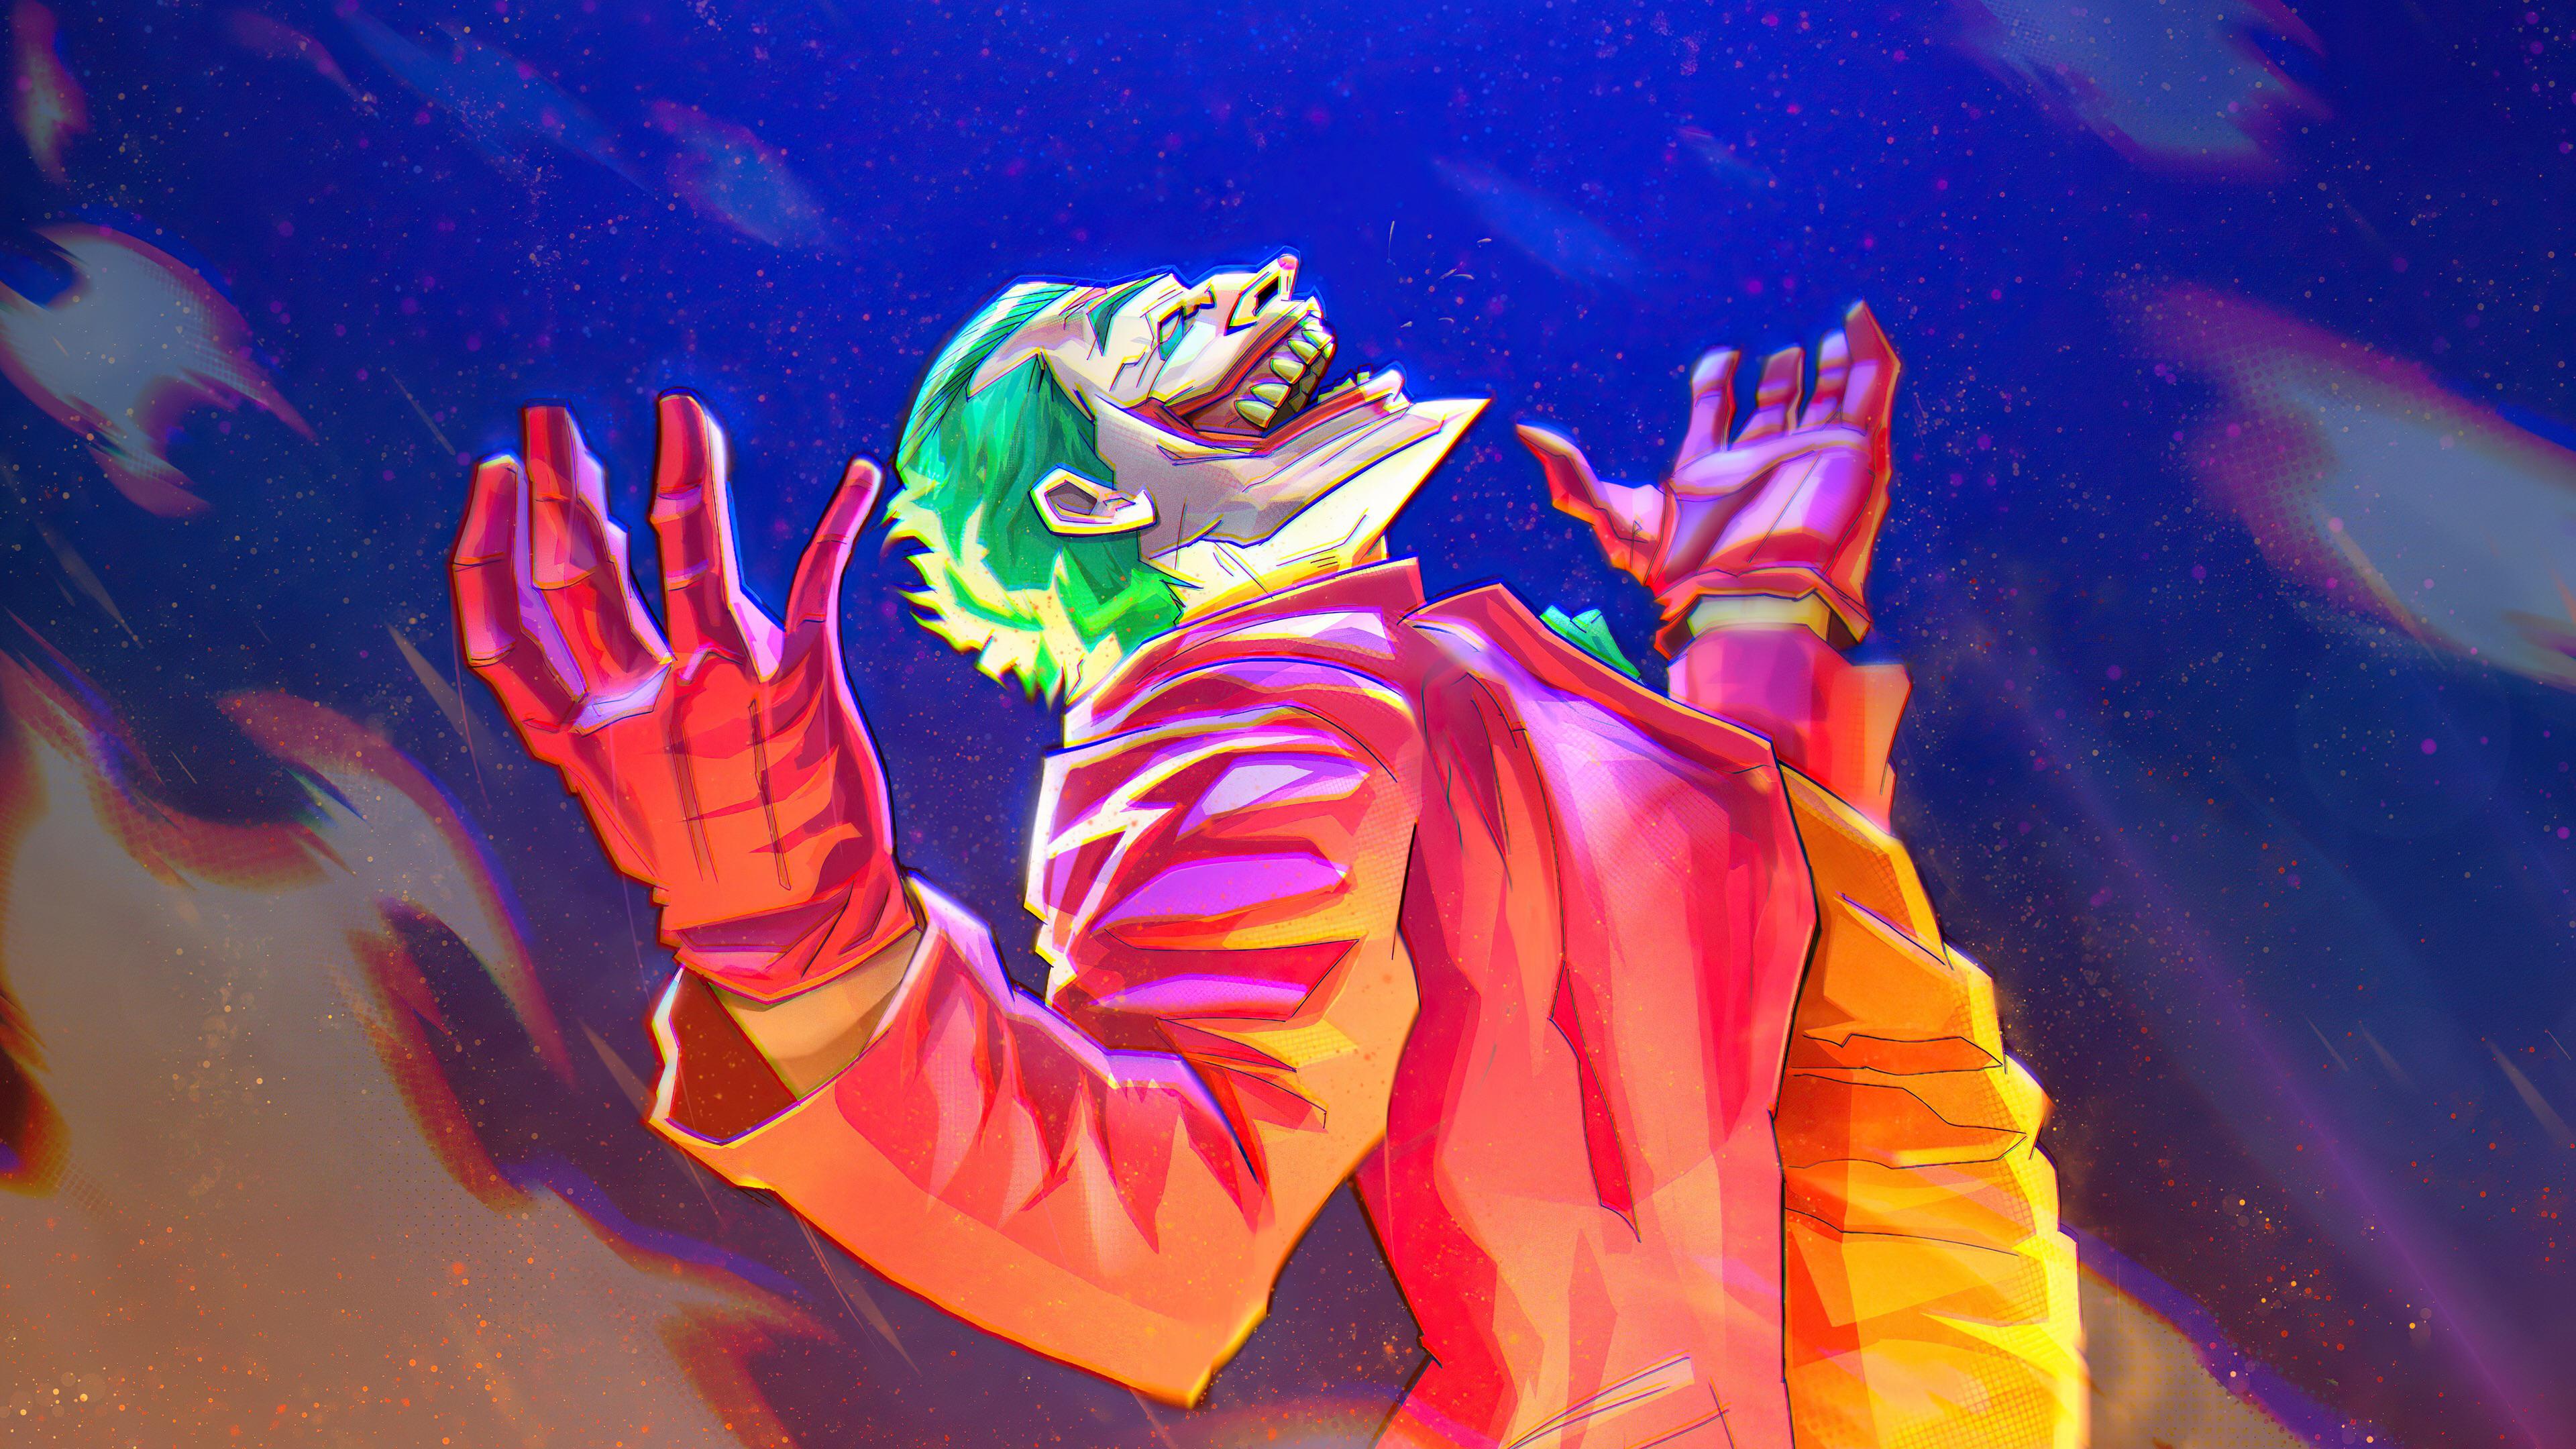 Joker 4K wallpapers for your desktop or mobile screen free and easy to  download